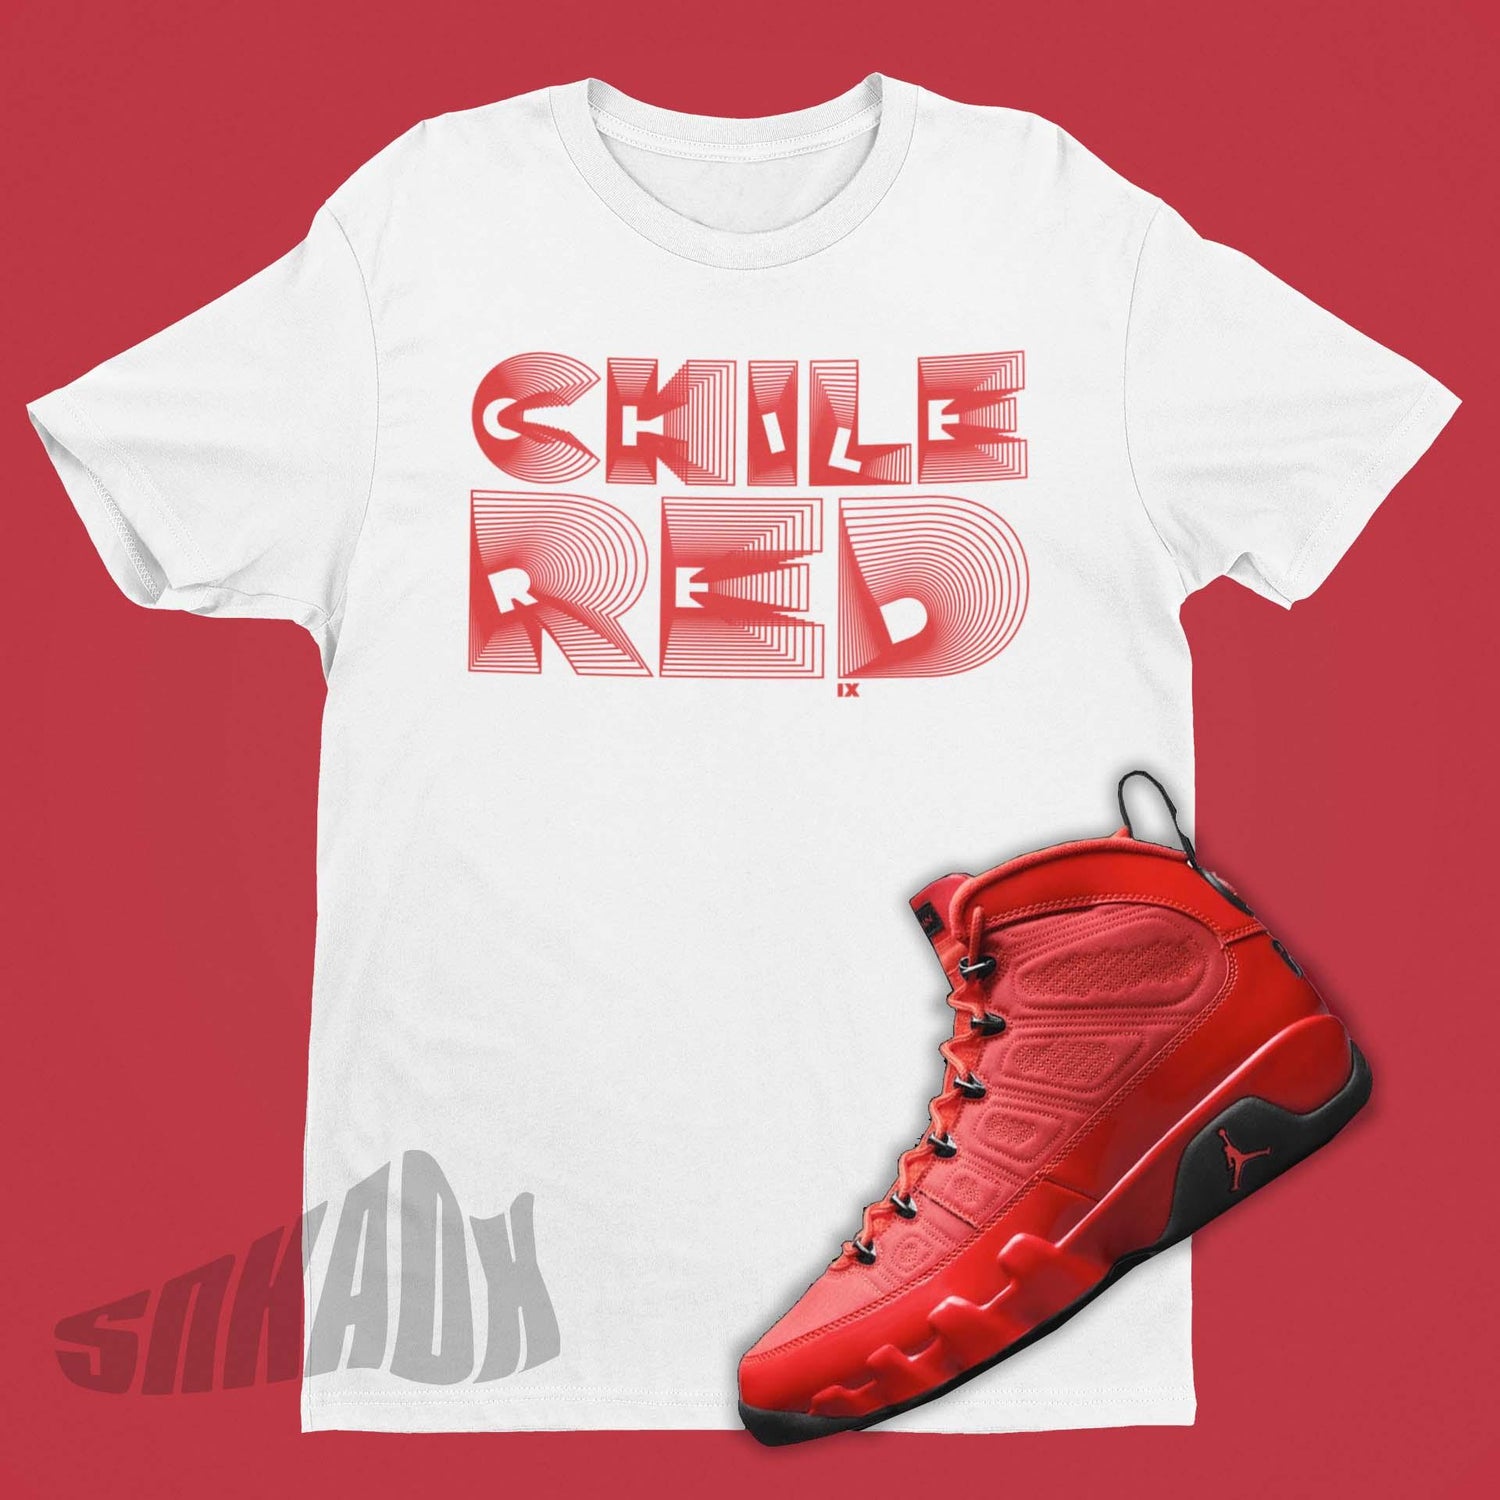 Chile Red Spiral Shirt To Match Air Jordan 9 Chile Red - SNKADX